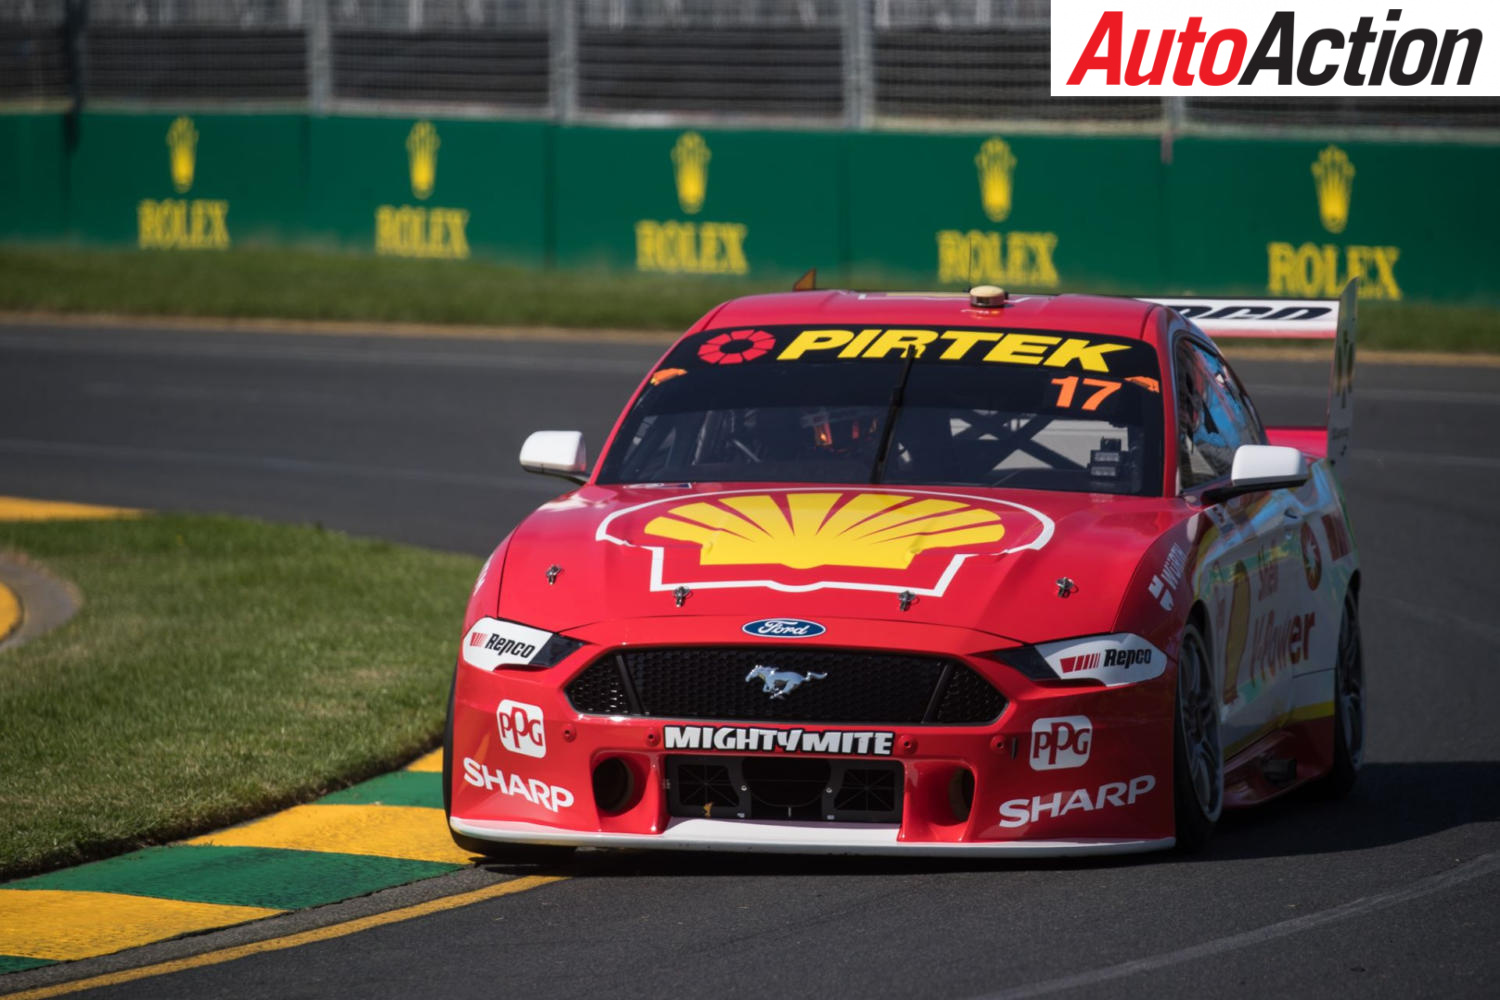 Scott McLaughlin dominated qualifying for the first two races - Photo: InSyde Media